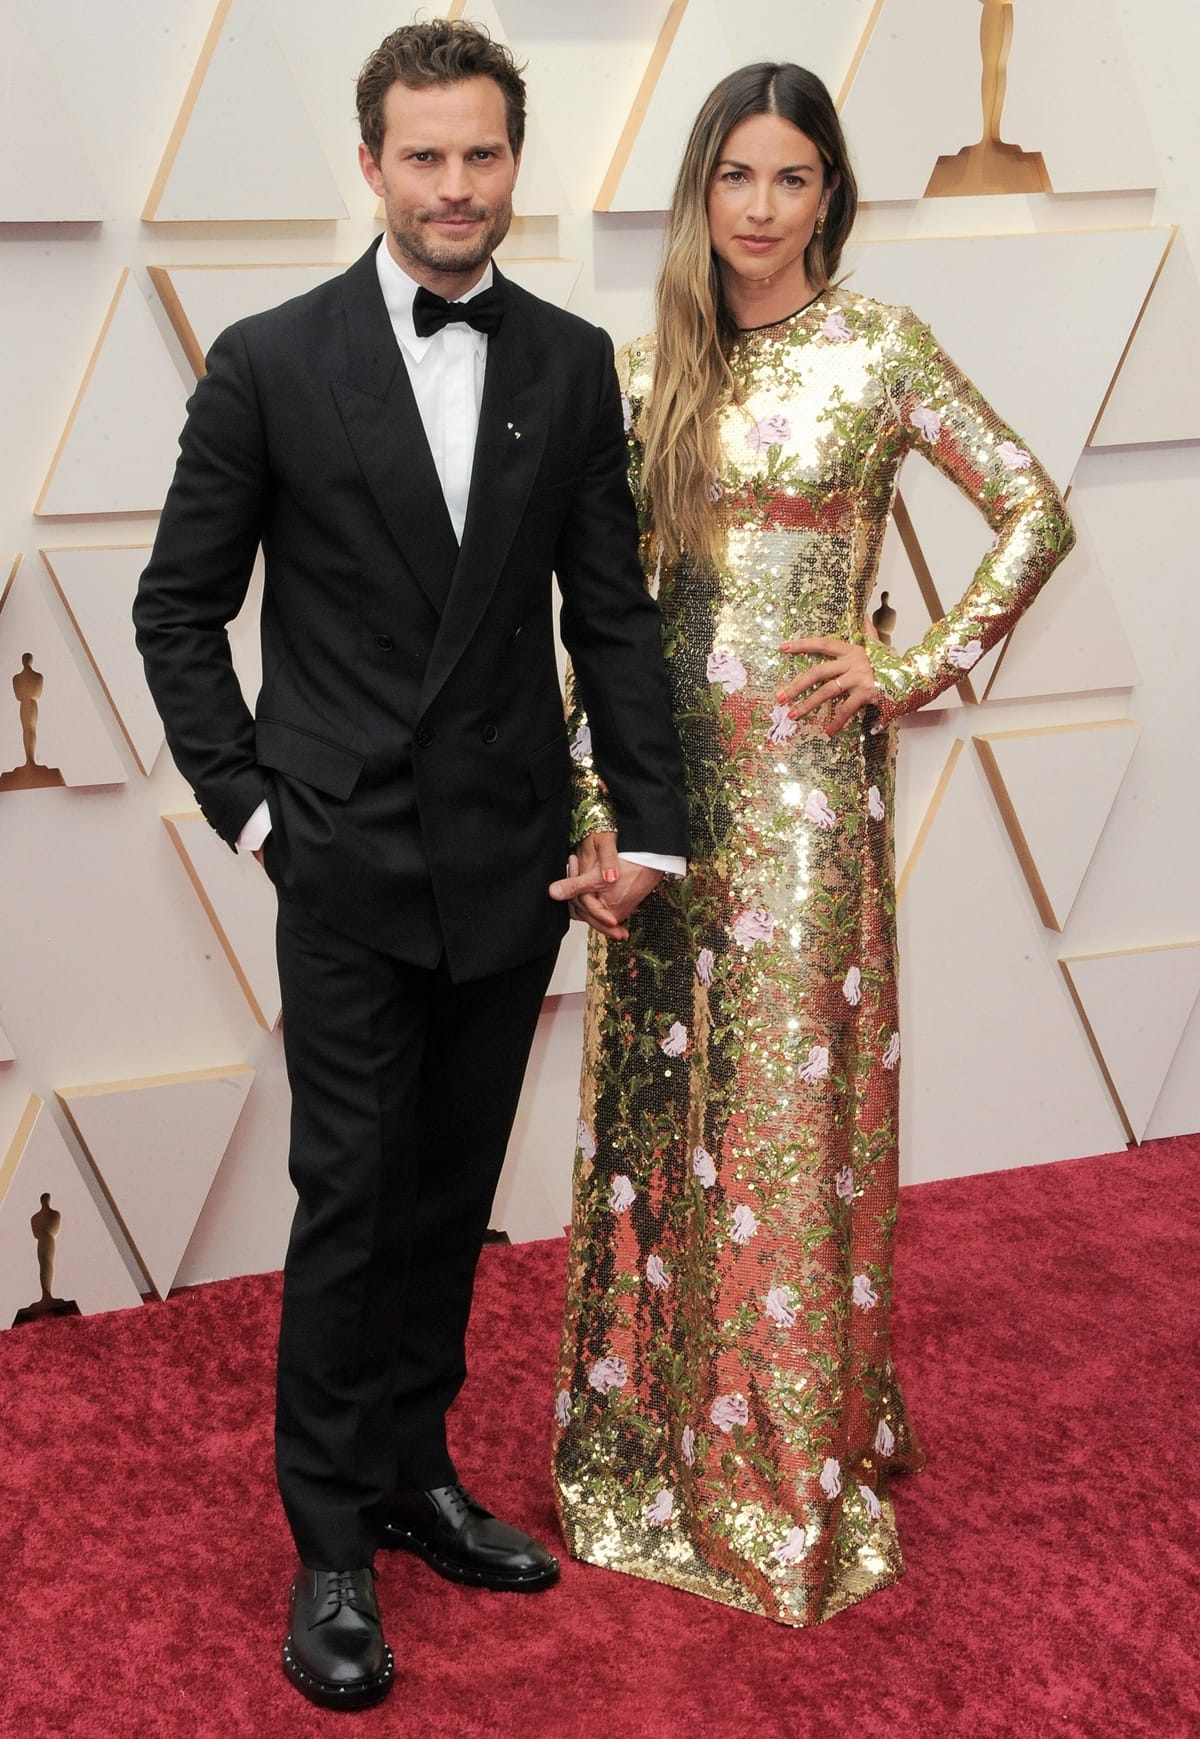 Jamie Dornan and his wife Amelia Warner attend the 94th Annual Academy Awards